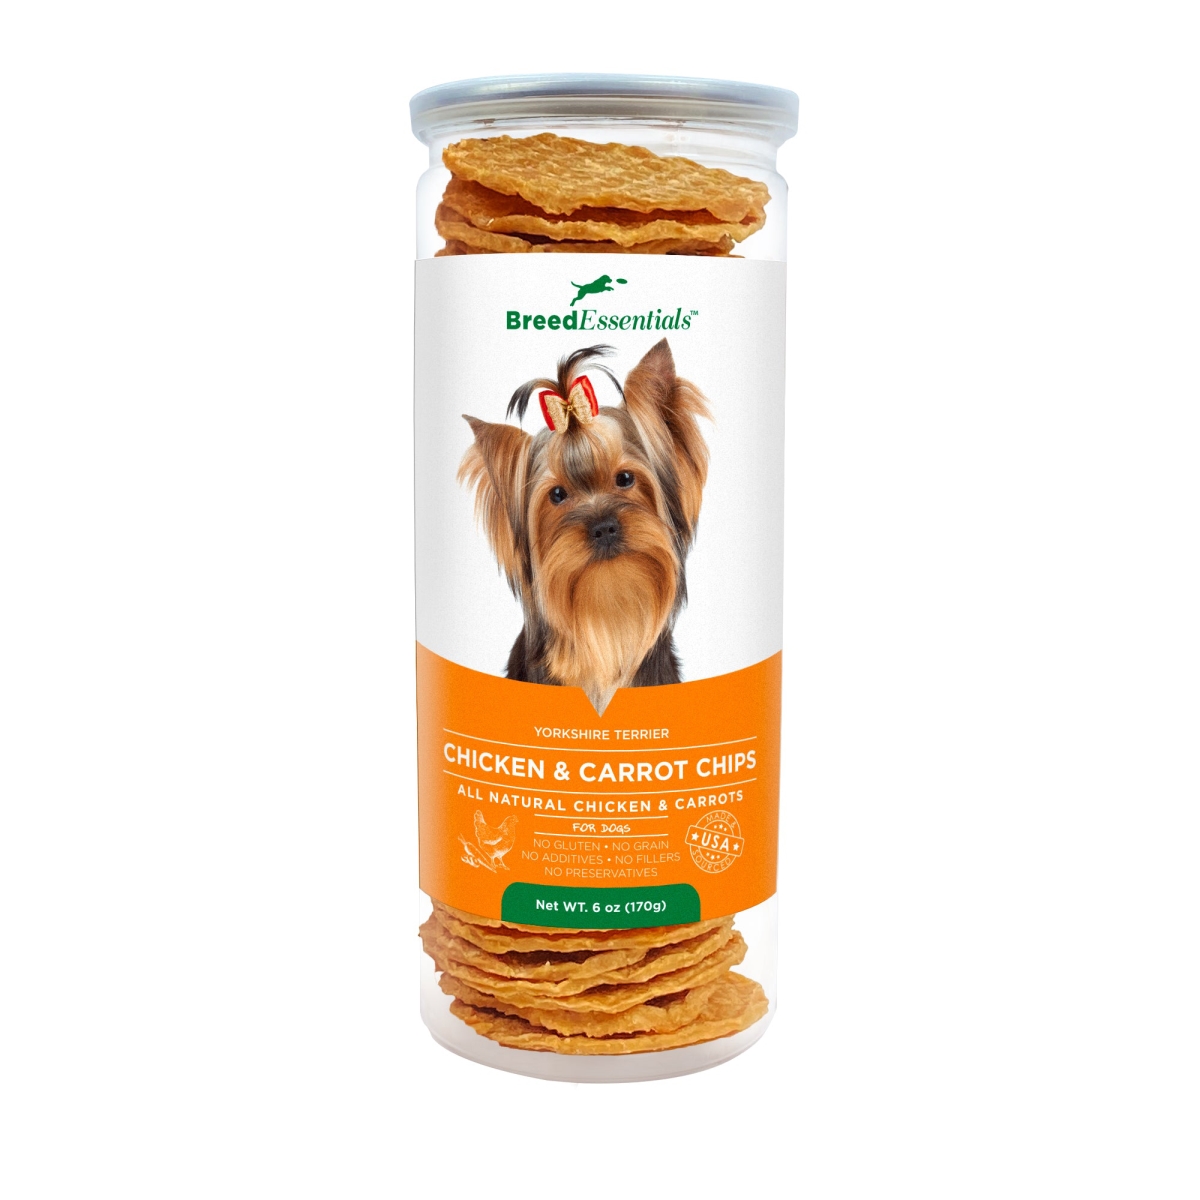 Picture of Breed Essentials 197247000235 6 oz Chicken & Carrot Chips - Yorkshire Terrier